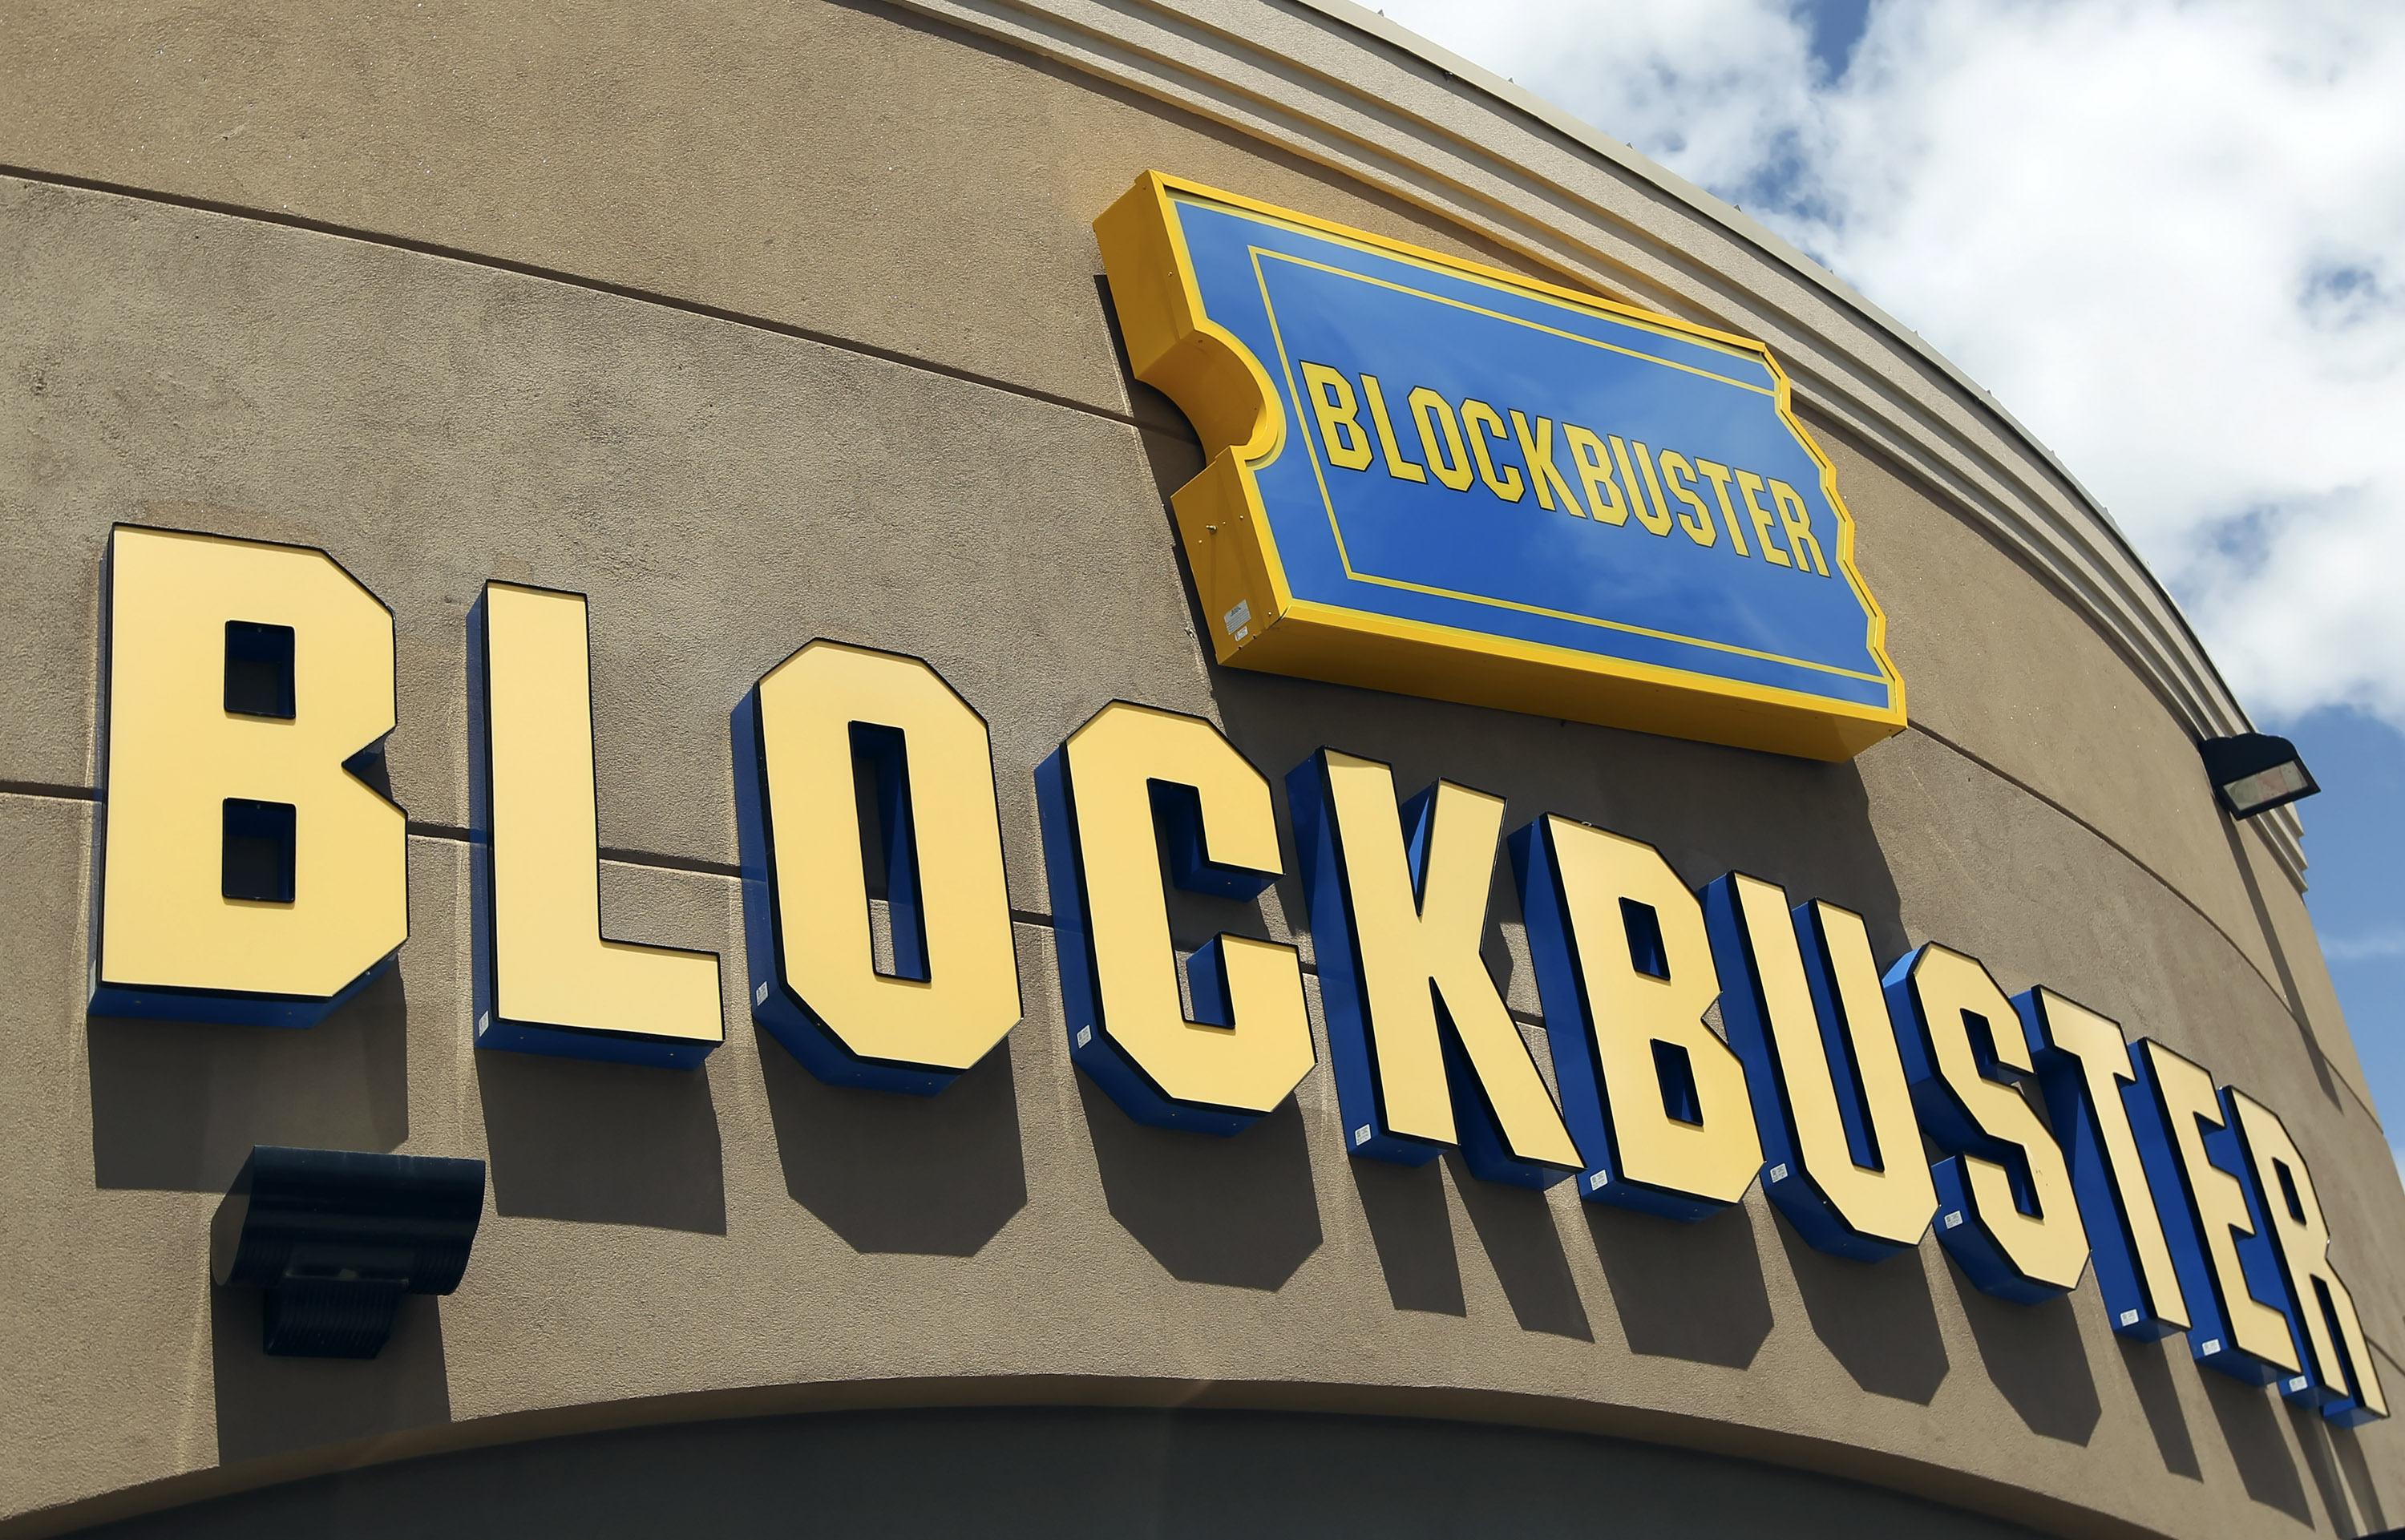 Signage hangs outside a Blockbuster store in Salt Lake City, Utah, U.S., on Wednesday, May 12, 2010. (George Frey—Bloomberg/Getty Images)